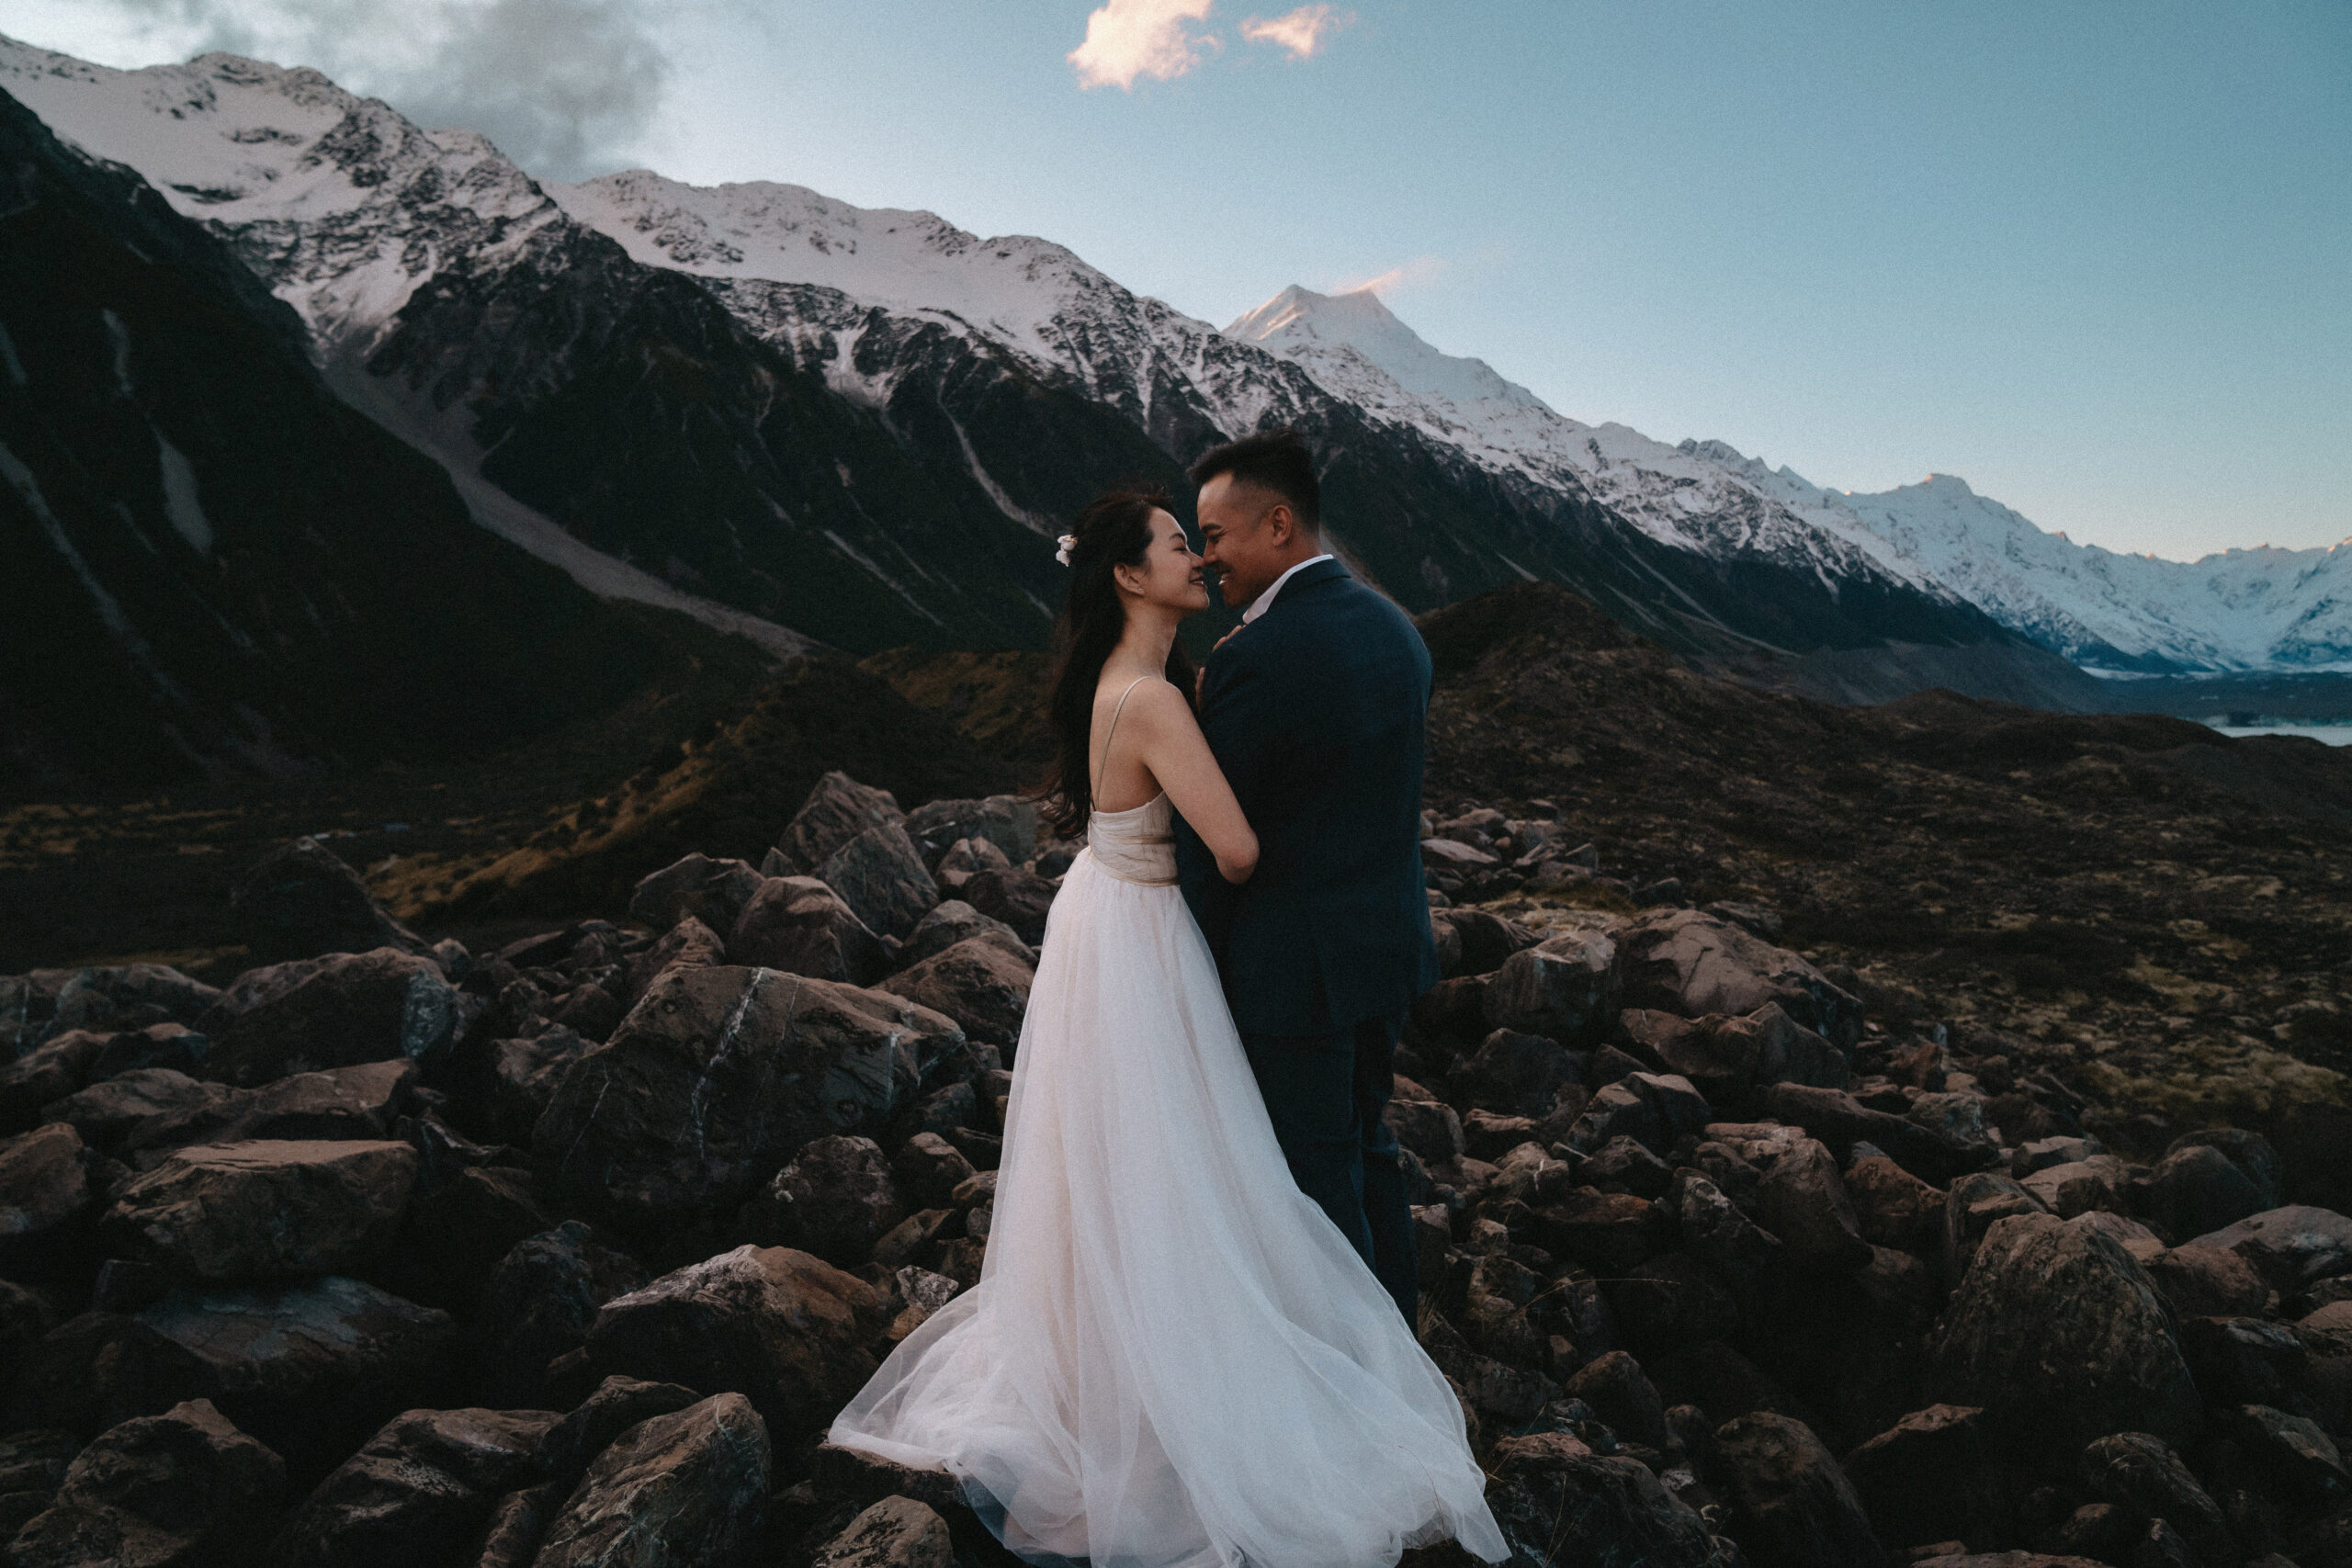 Small pre-wedding adventure in Mount Cook National Park